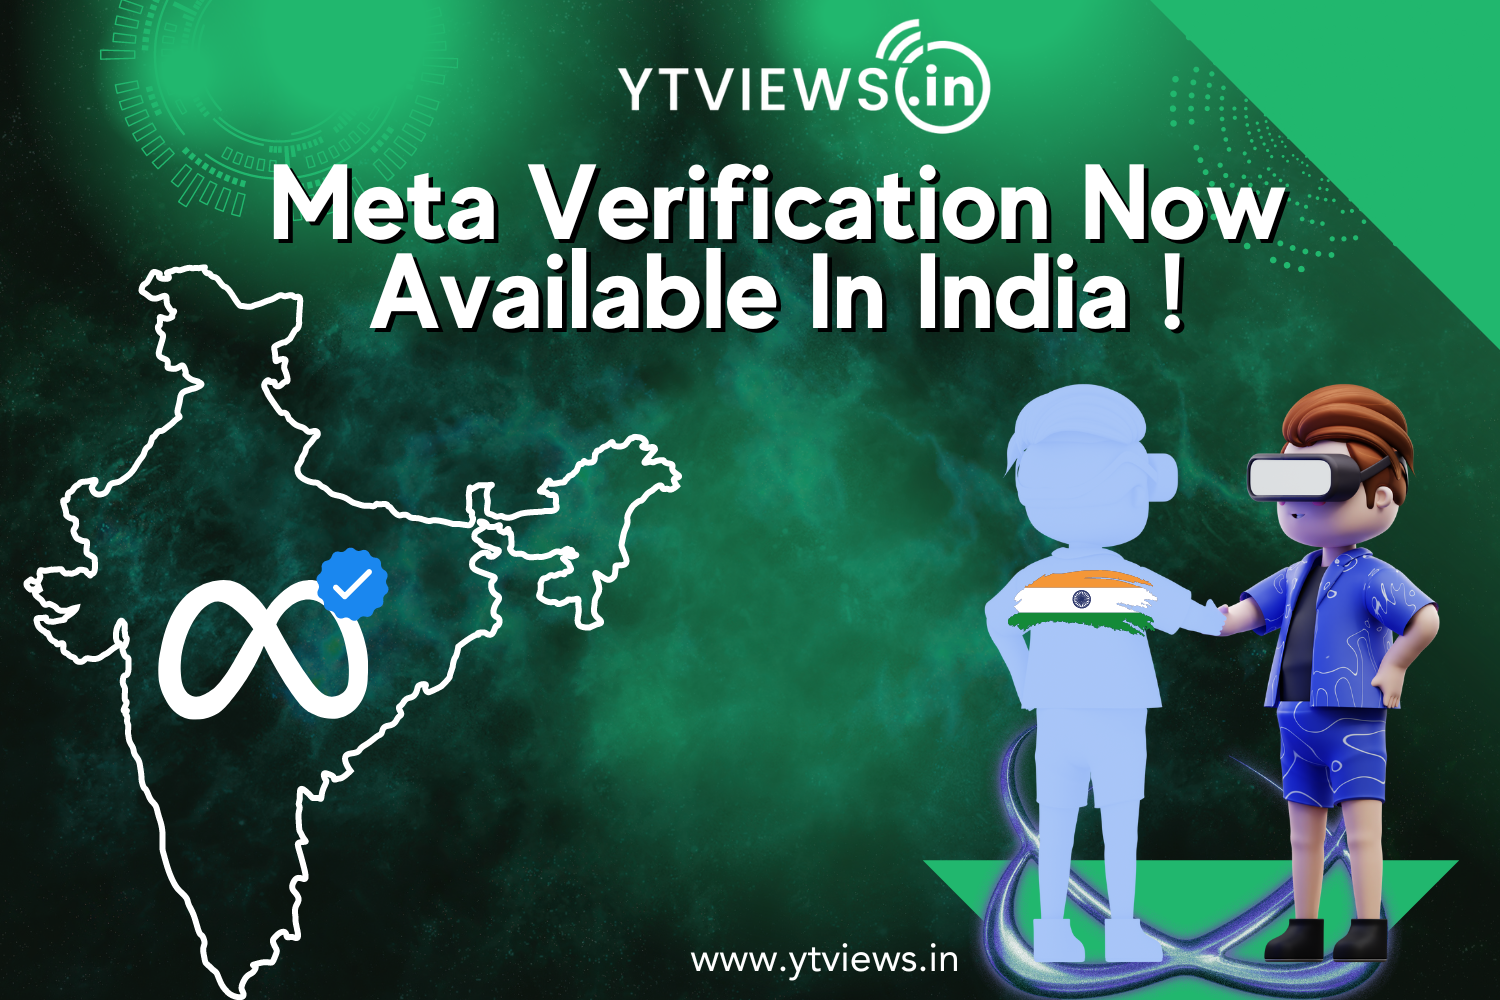 Meta Verification is now available in India. How can you get that blue tick and for how much?